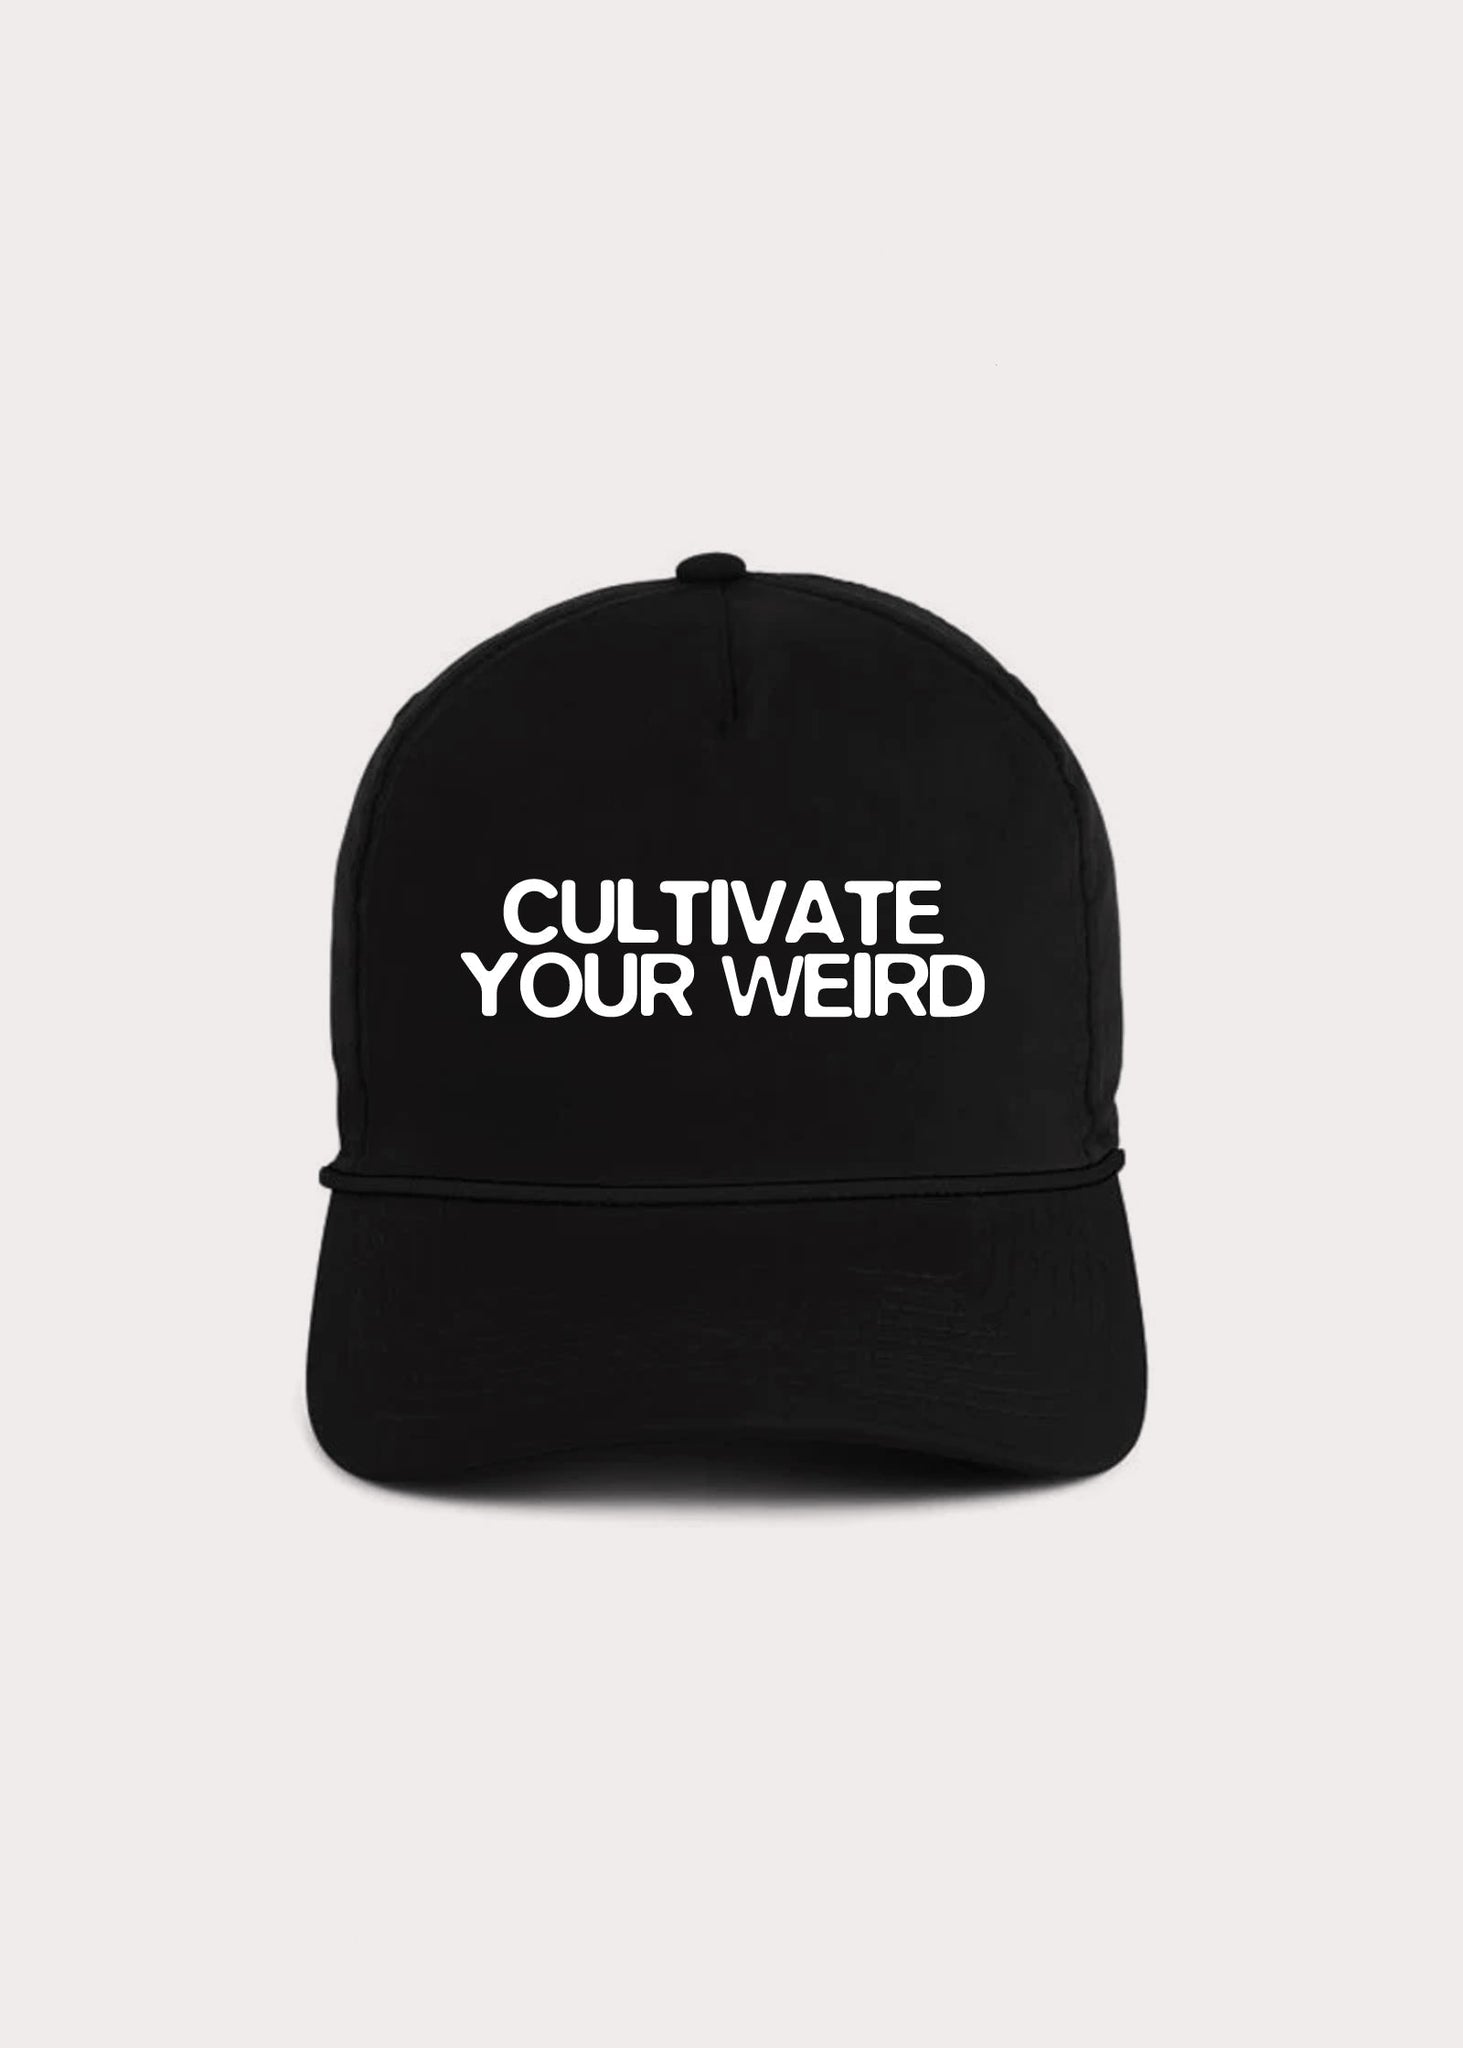 Cultivate Your Weird Hat Black